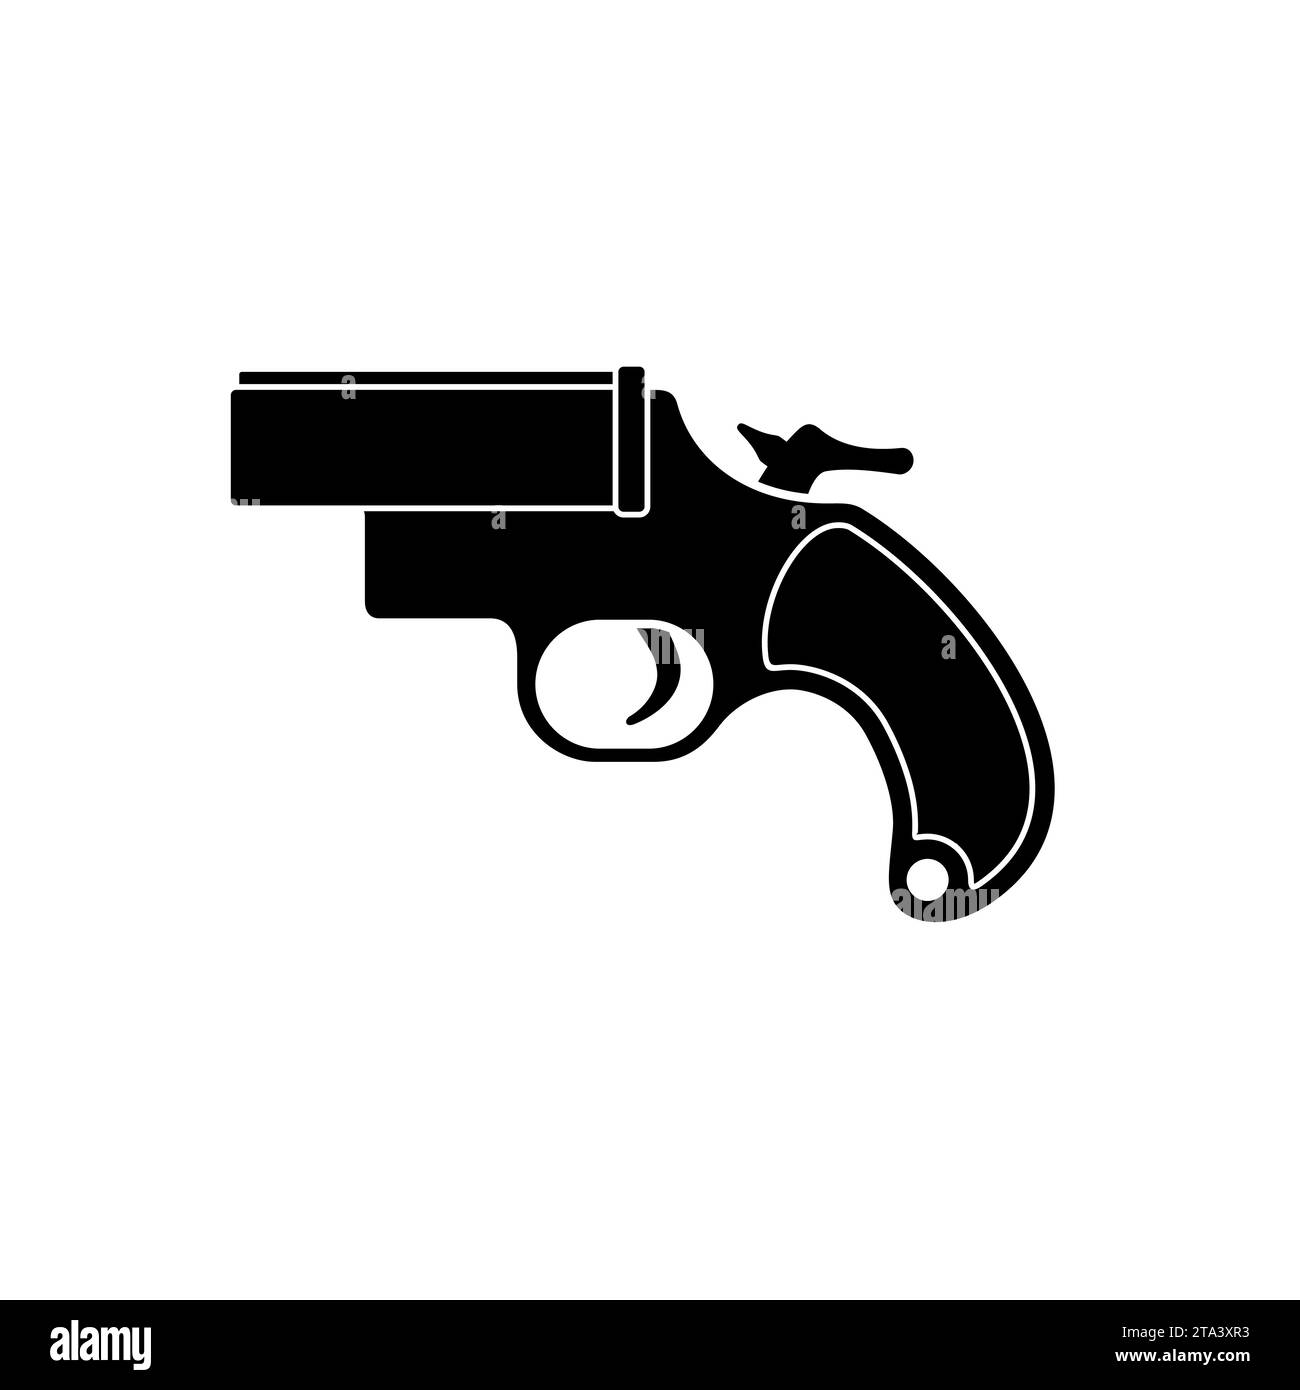 A flare gun icon, also known as a Very pistol or signal pistol, is a large-bore handgun that discharges flares. The flare gun is used for a distress Stock Vector